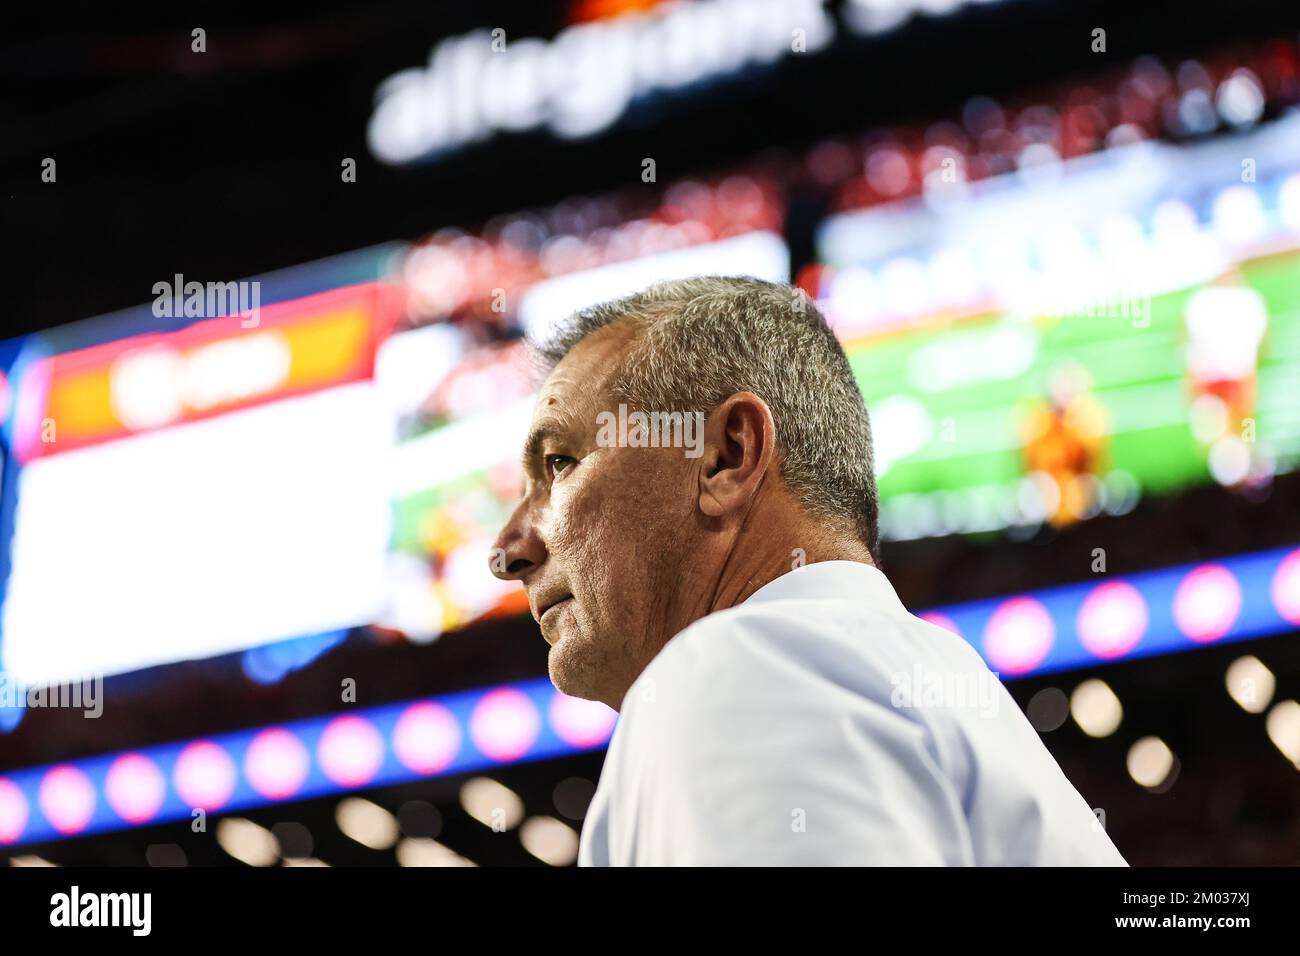 Las Vegas, NV, USA. 2nd Dec, 2022. Urban Meyer, Fox Sports analyst, attends the Pac-12 Championship Game featuring the Utah Utes and the USC Trojans at Allegiant Stadium in Las Vegas, NV. Christopher Trim/CSM/Alamy Live News Stock Photo